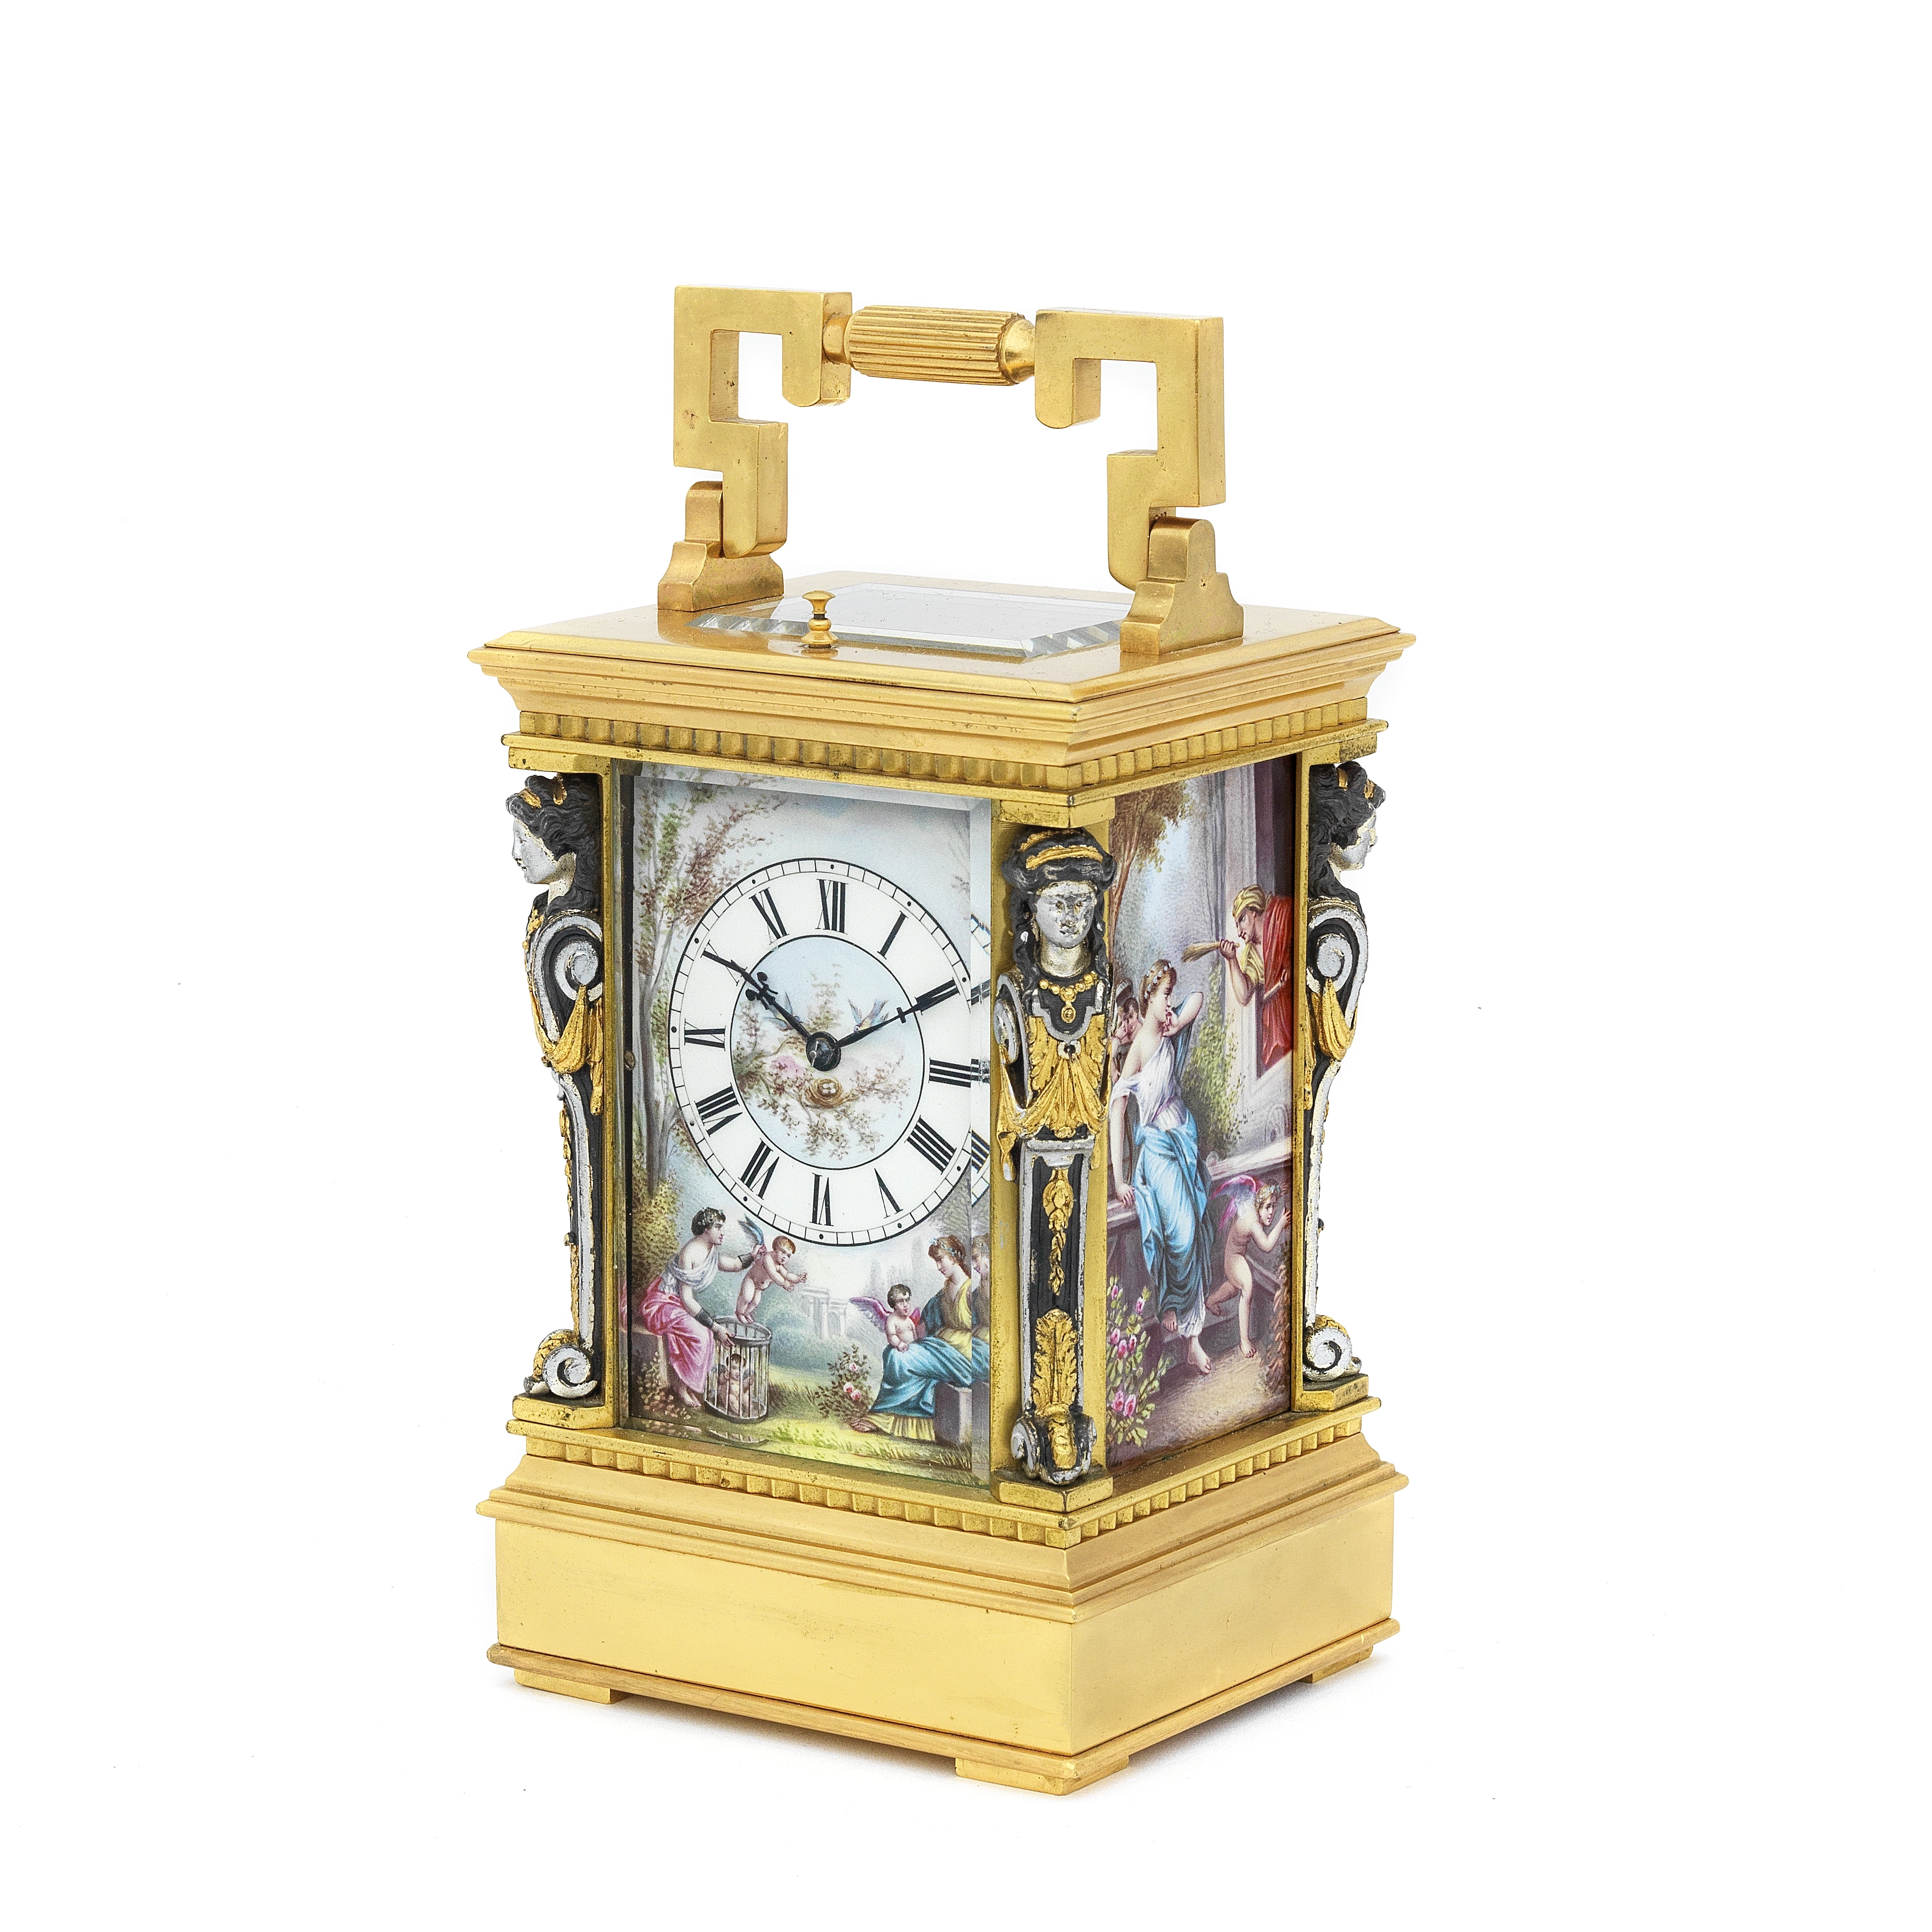 A fine and rare late 19th Century French porcelain-panelled Carriage clock Victor Reclus, Paris